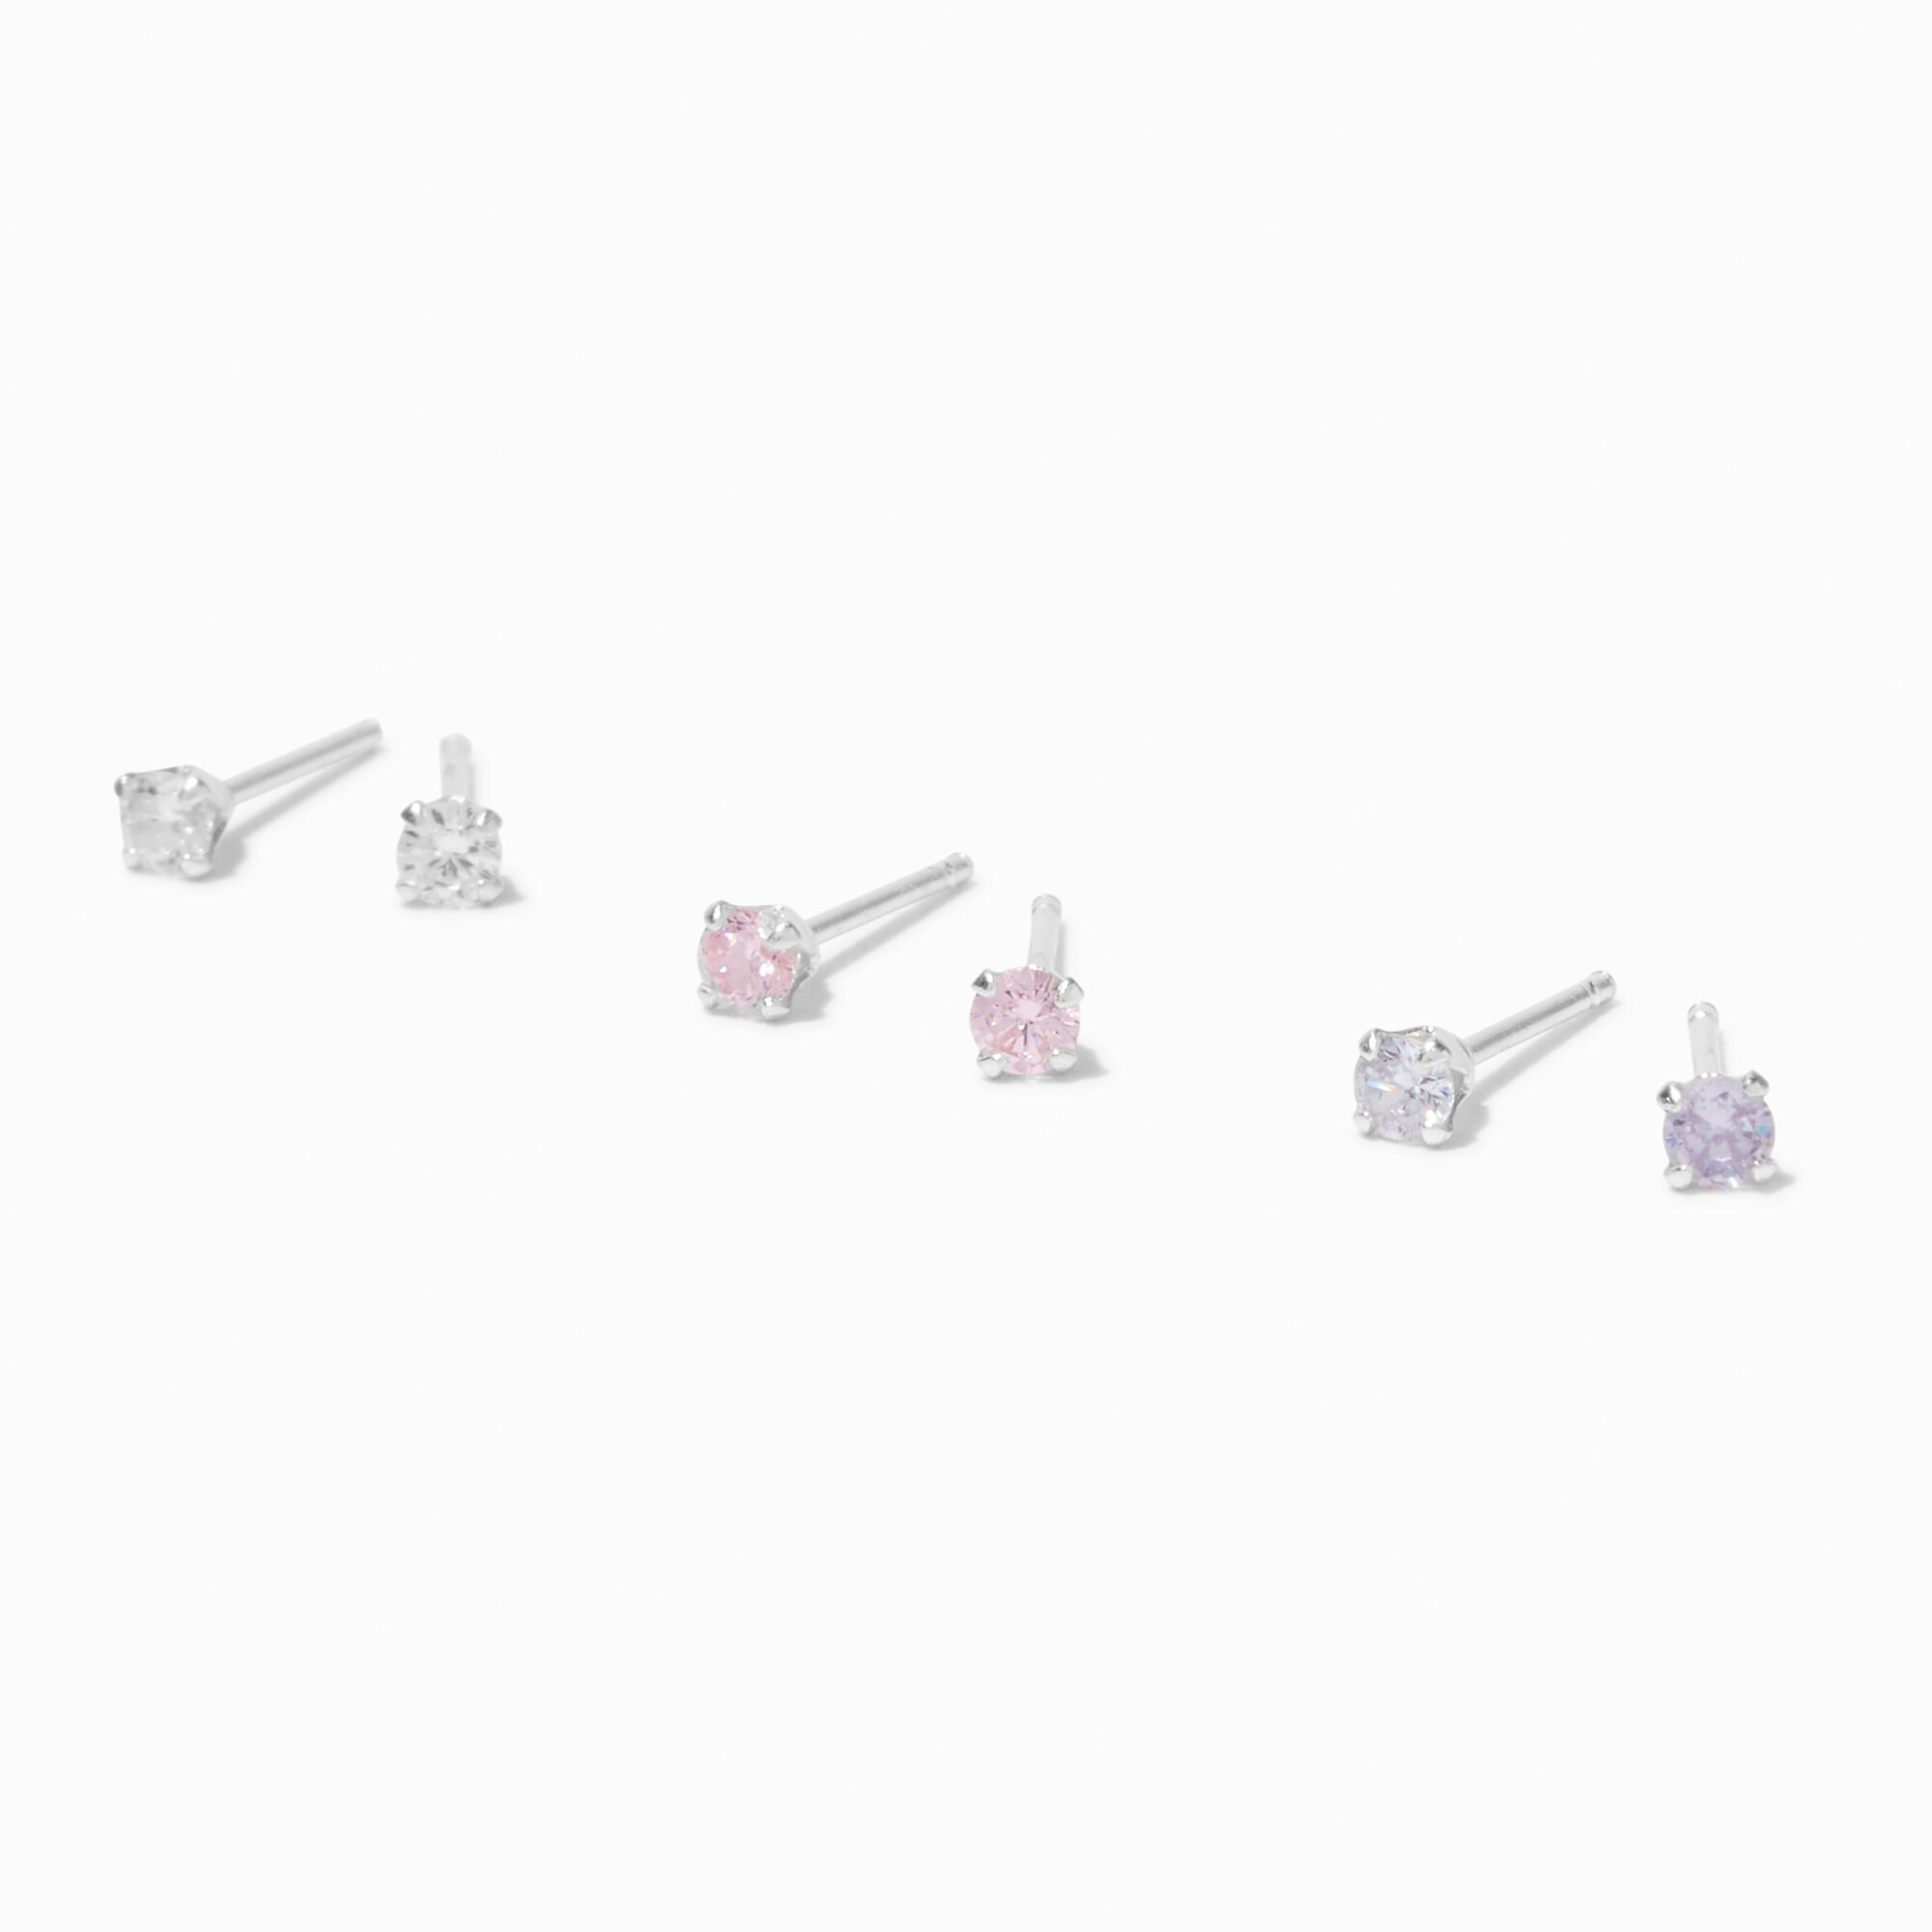 View C Luxe By Claires Cubic Zirconia Clearpinklavender 4MM Round Stud Earrings 3 Pack Silver information